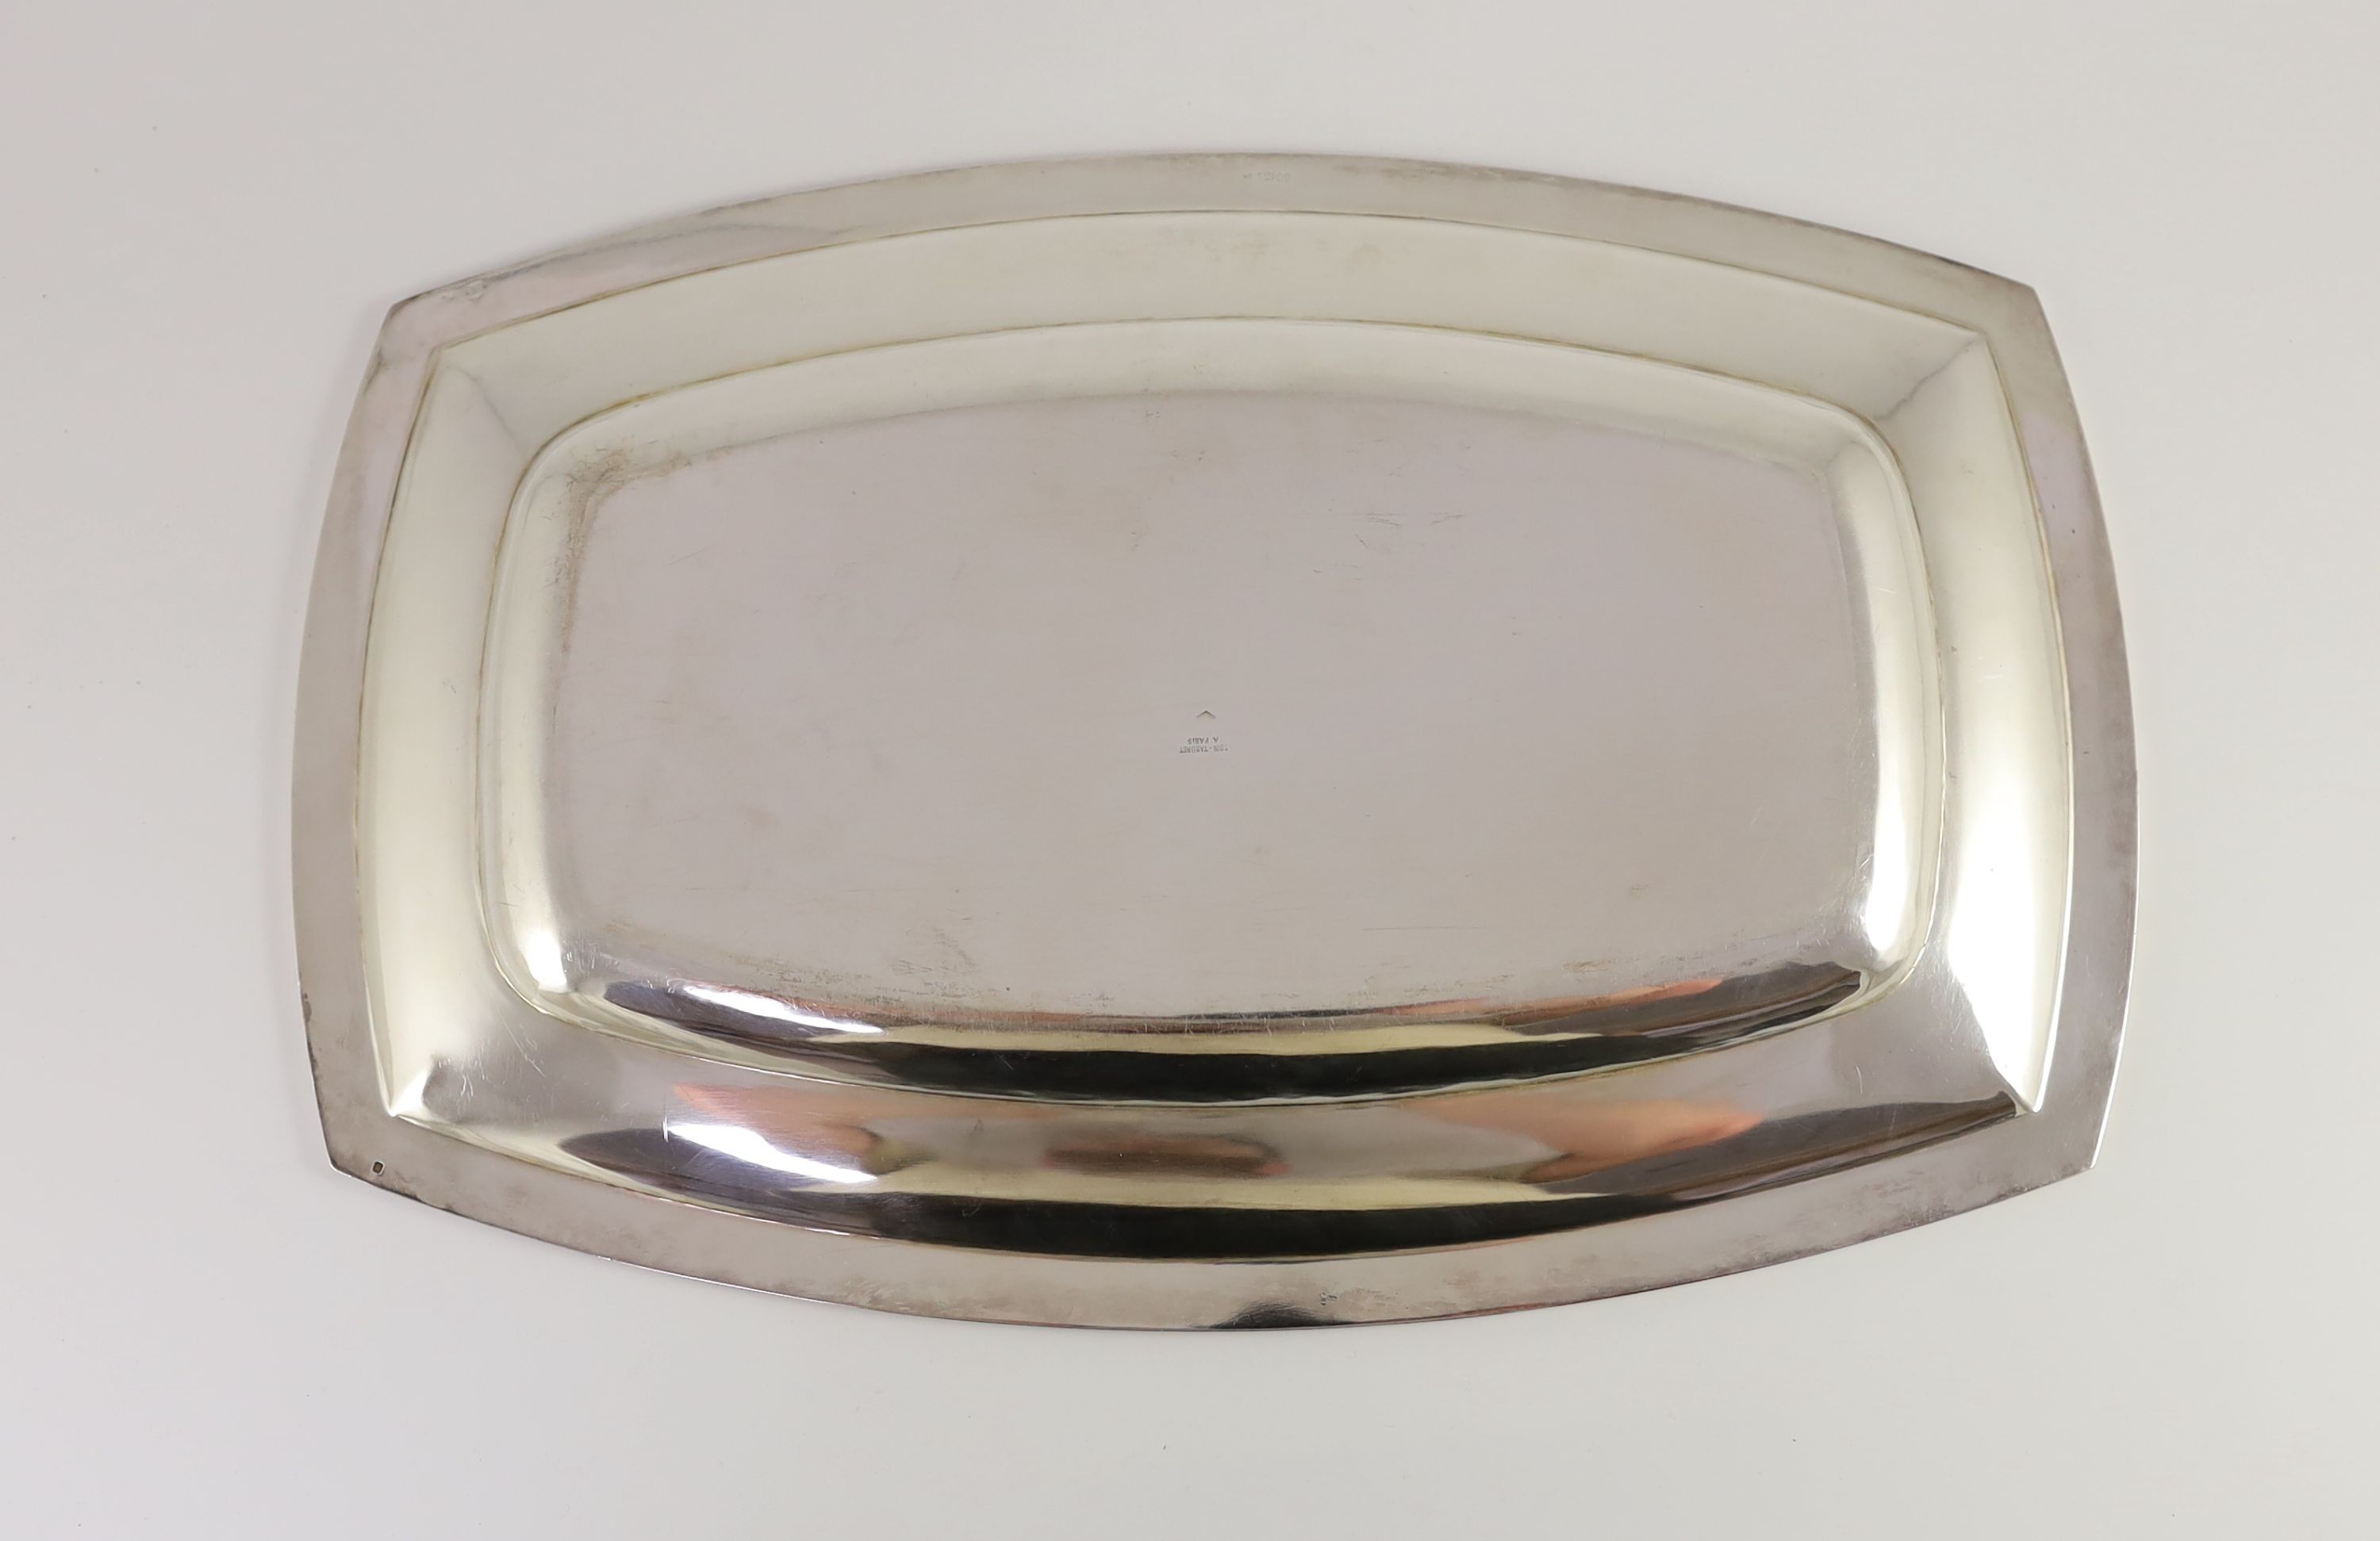 A 1920’s French 950 standard serving dish, retailed by Boin-Taburet, Paris